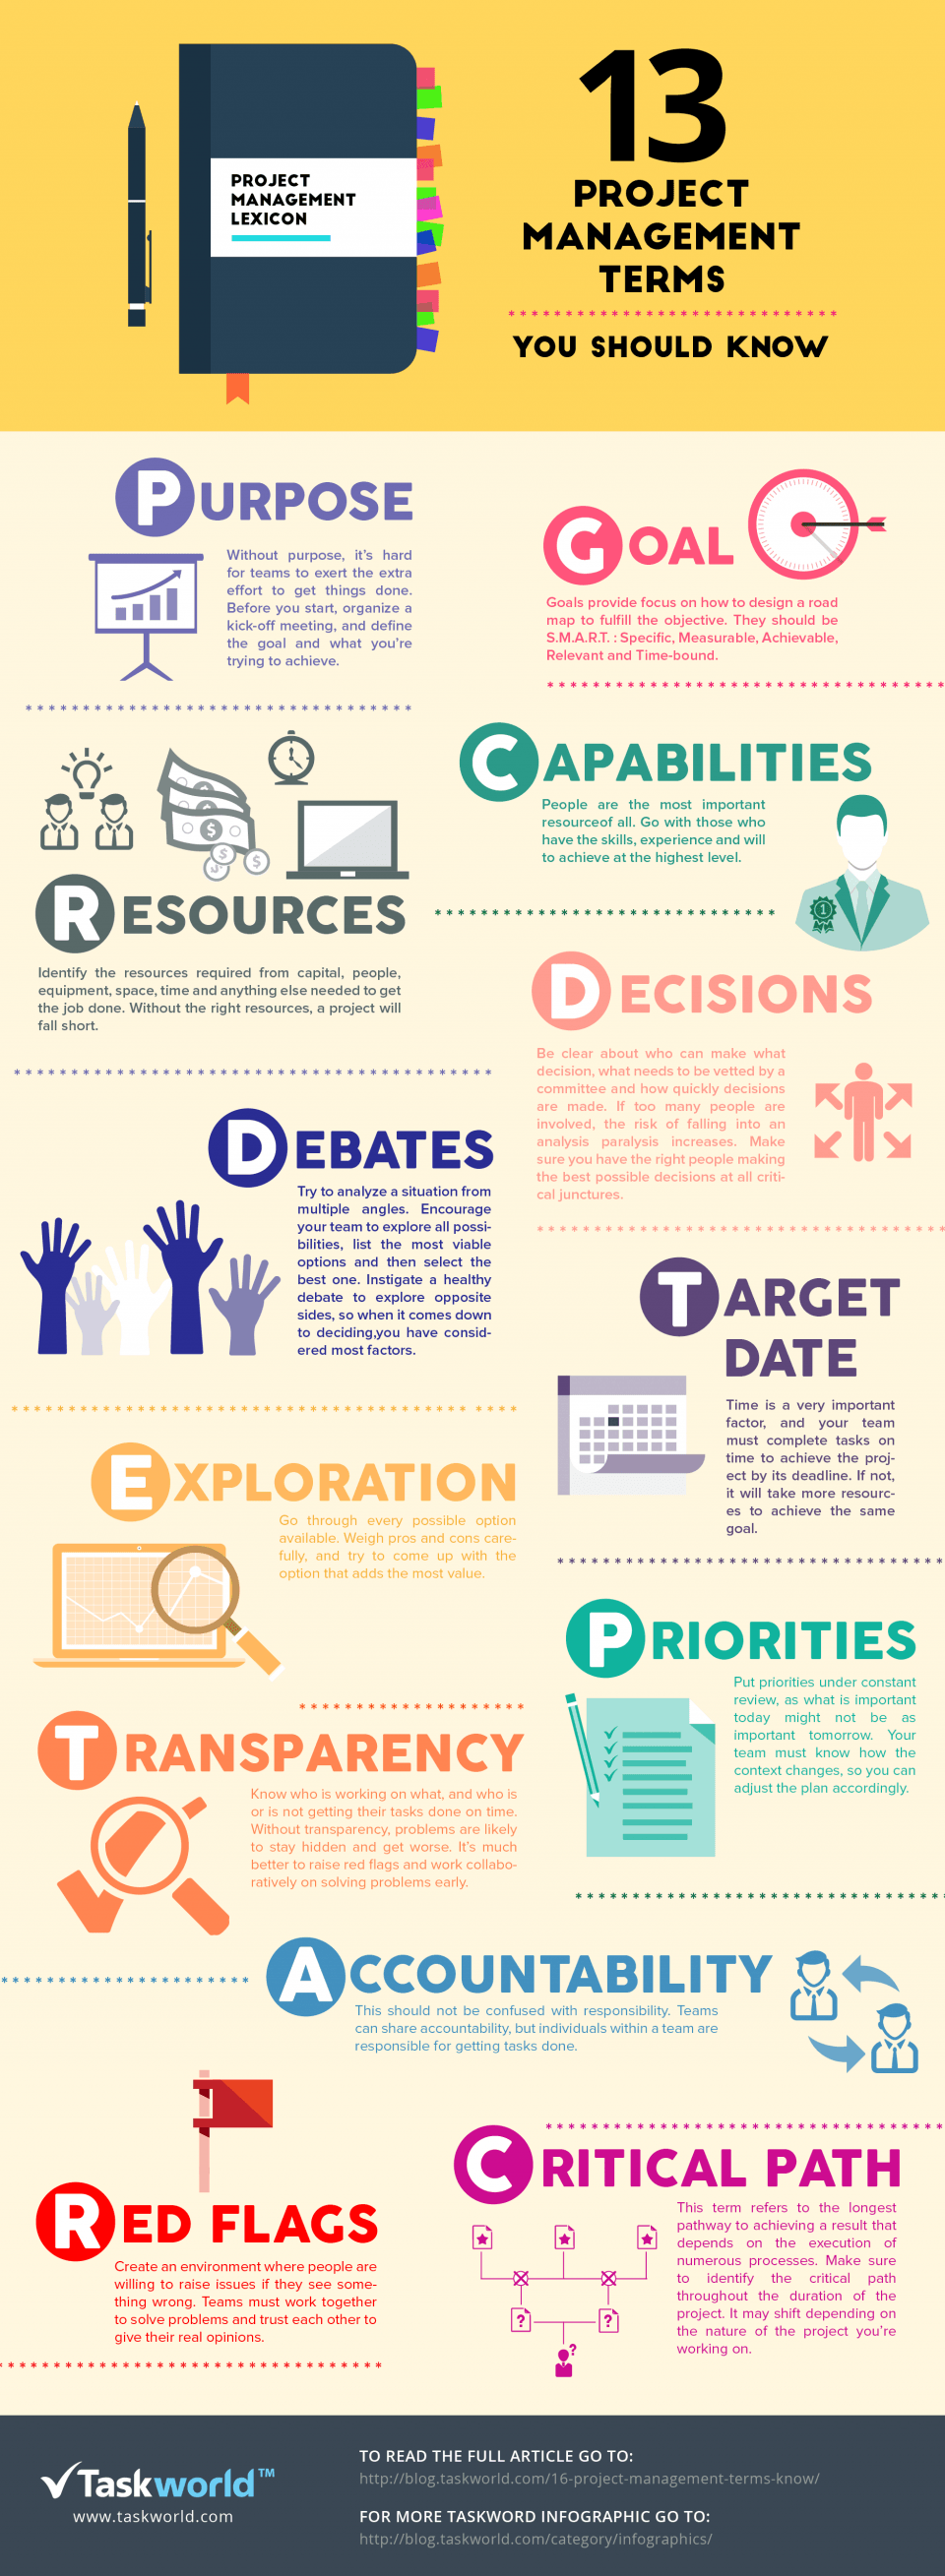 Top 13 Project Management Terms Infographic